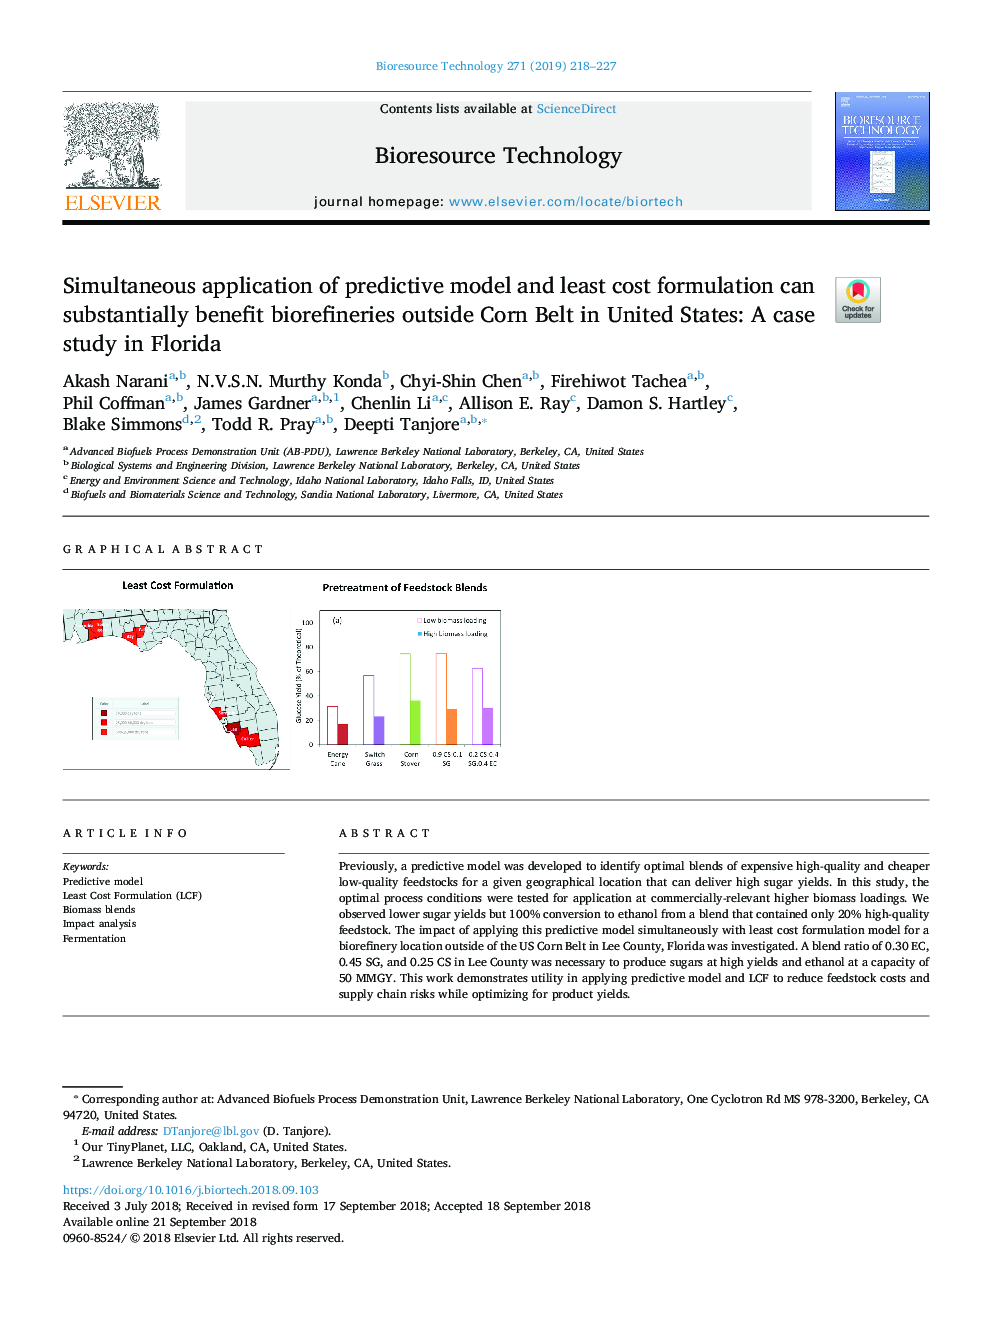 Simultaneous application of predictive model and least cost formulation can substantially benefit biorefineries outside Corn Belt in United States: A case study in Florida